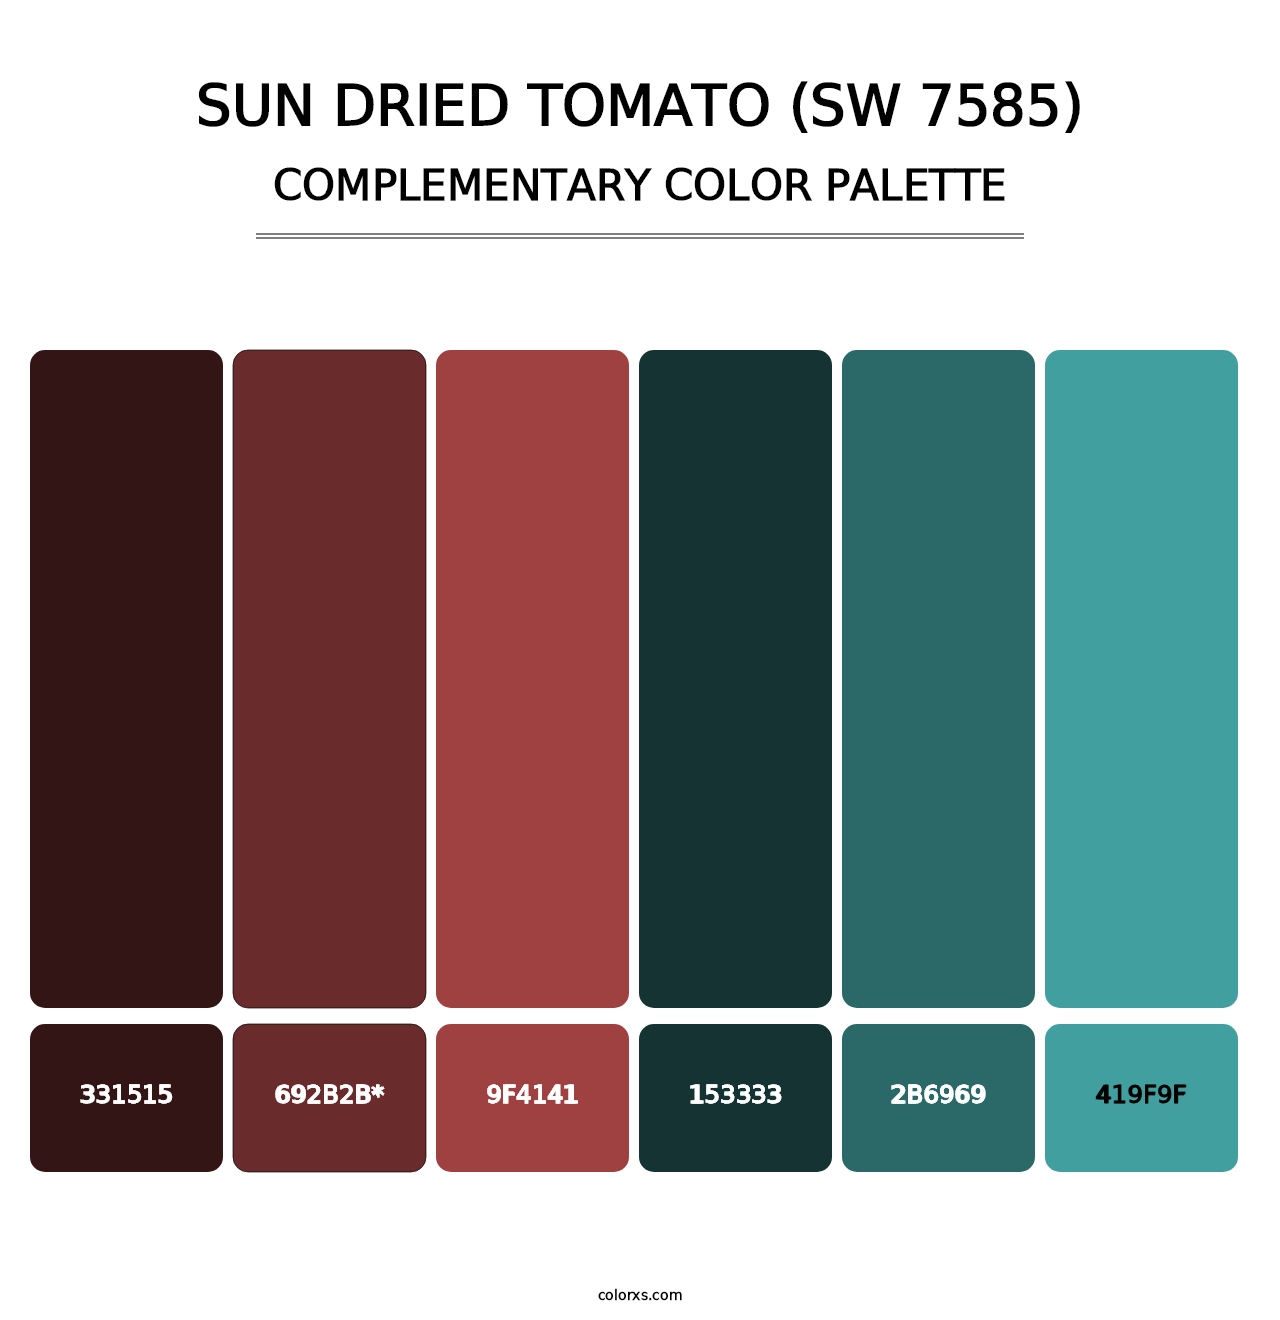 Sun Dried Tomato (SW 7585) - Complementary Color Palette